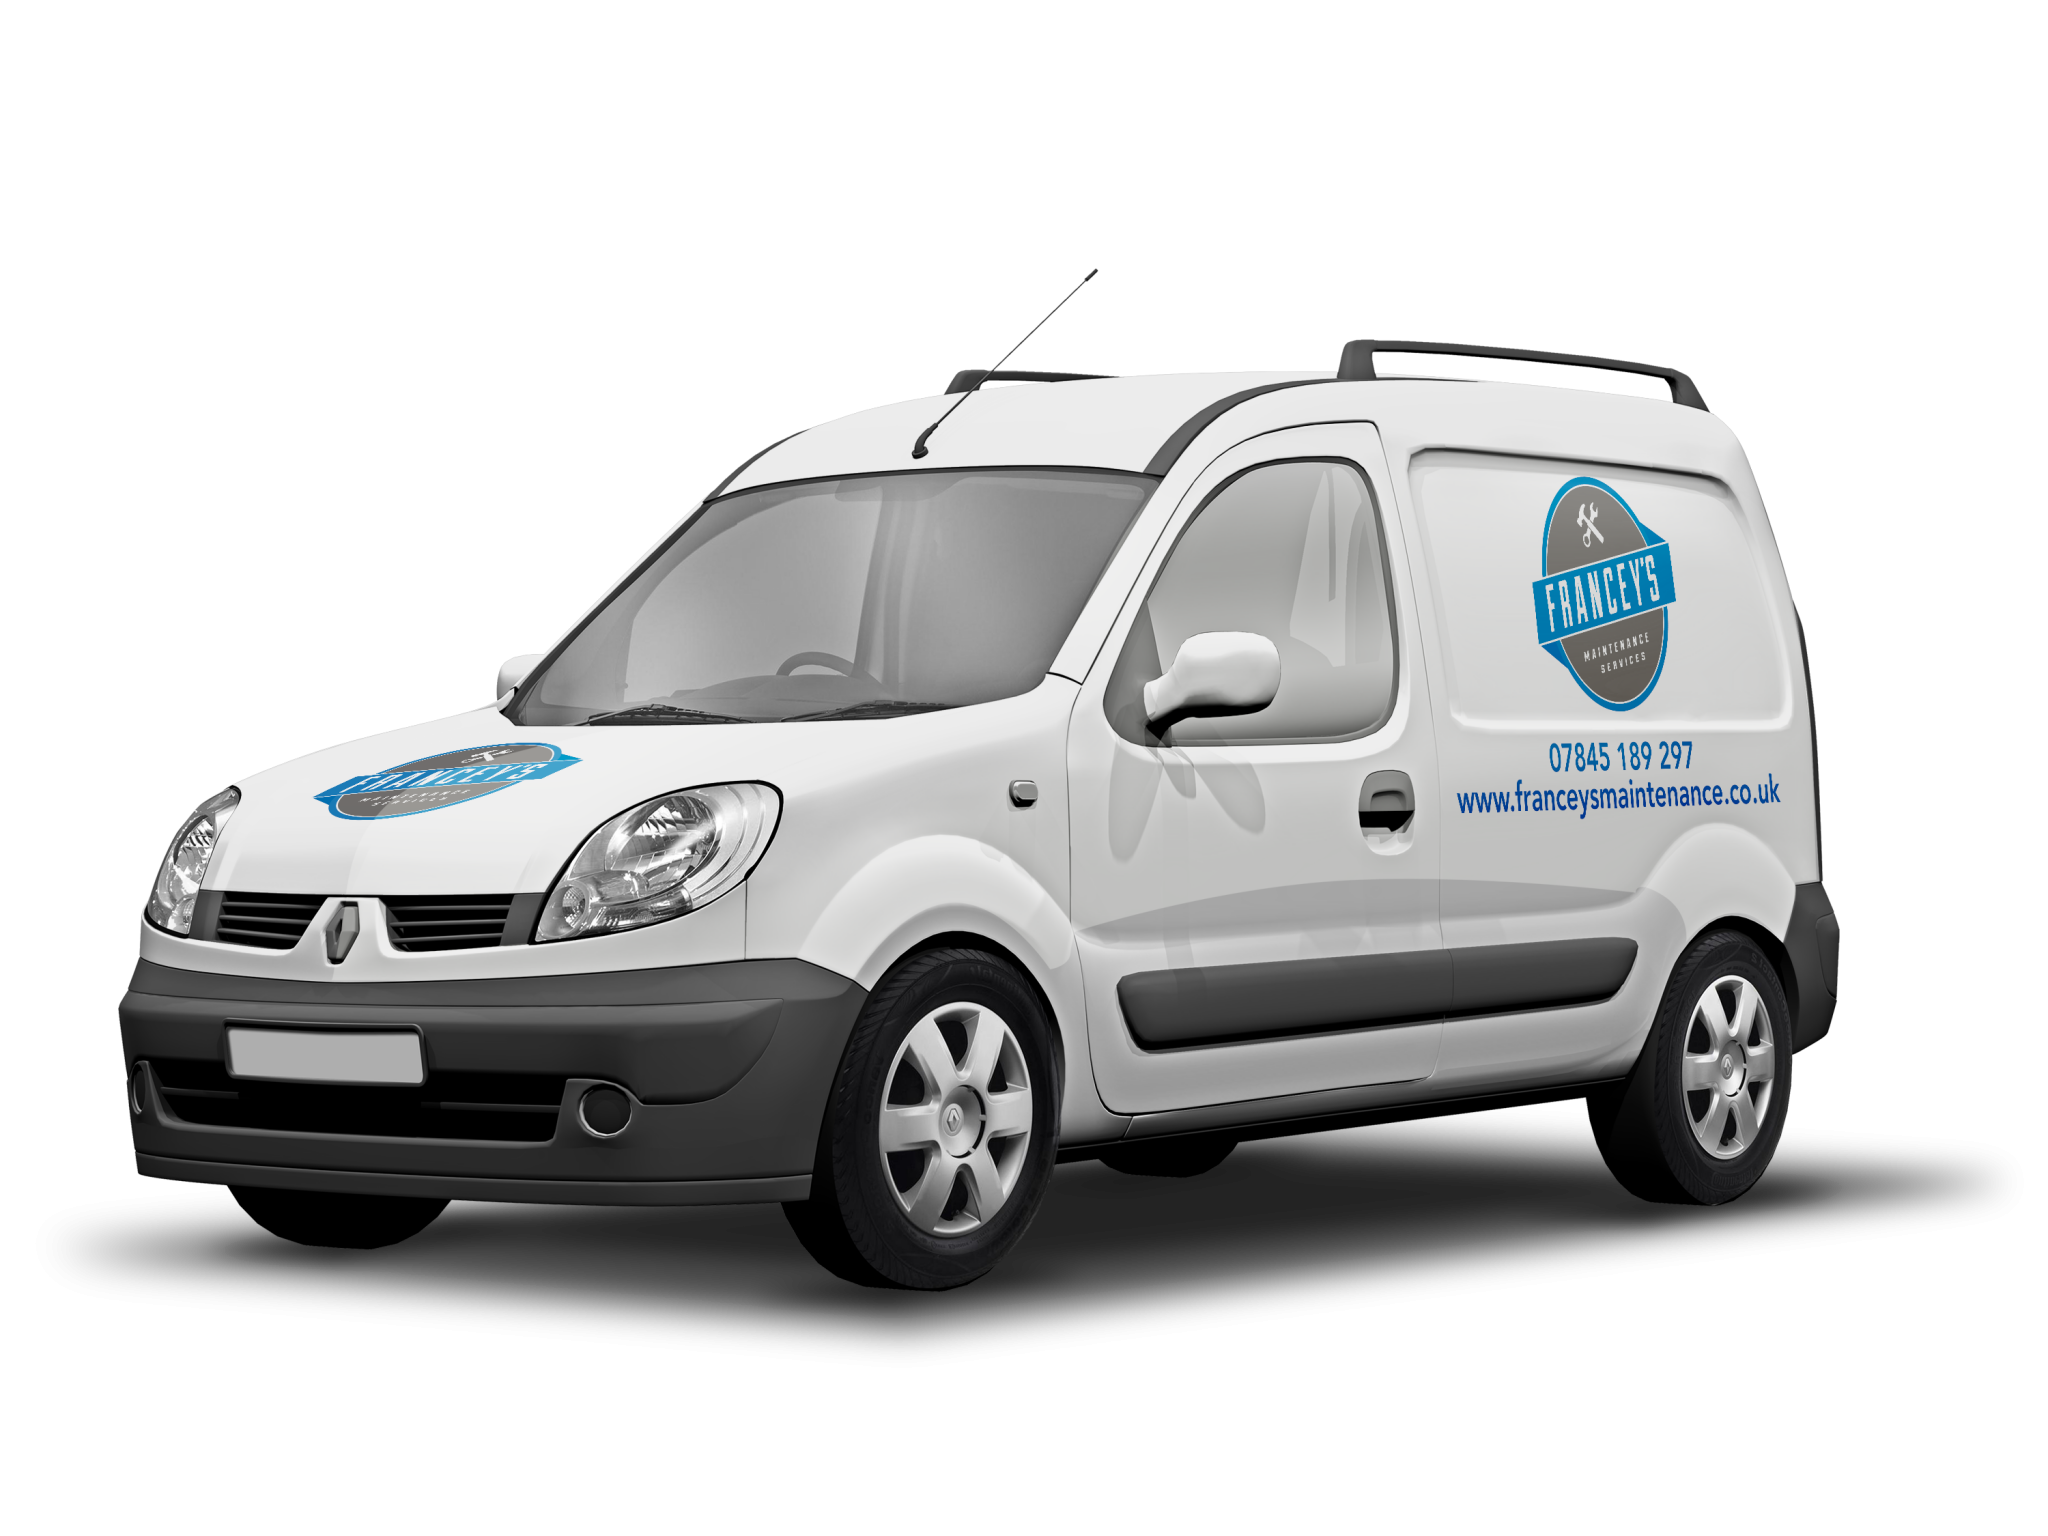 Small white van with logo of Francey's Maintenance on bonnet and side panel